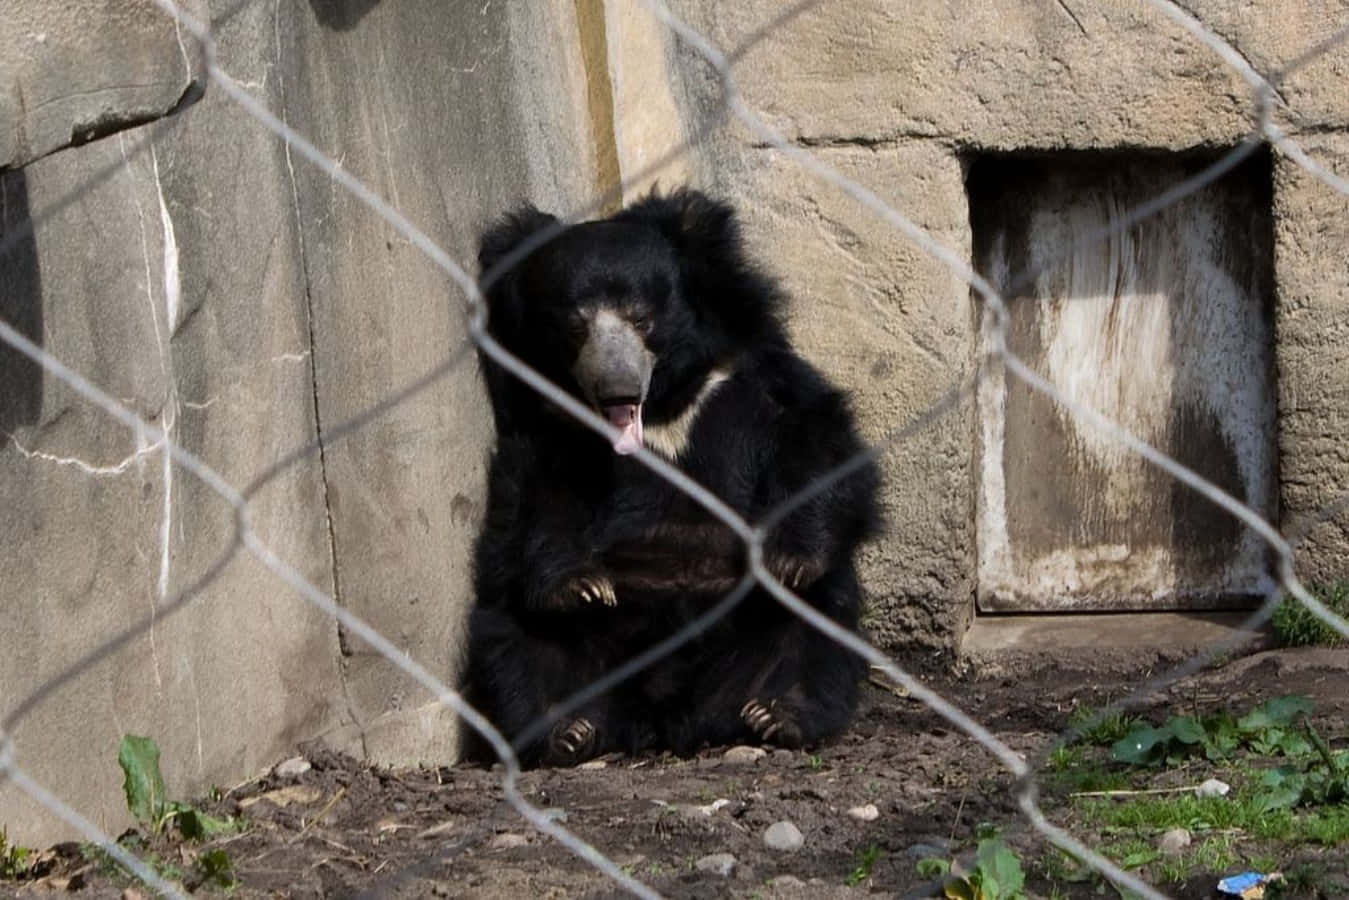 A Bear Is Sitting In A Cage